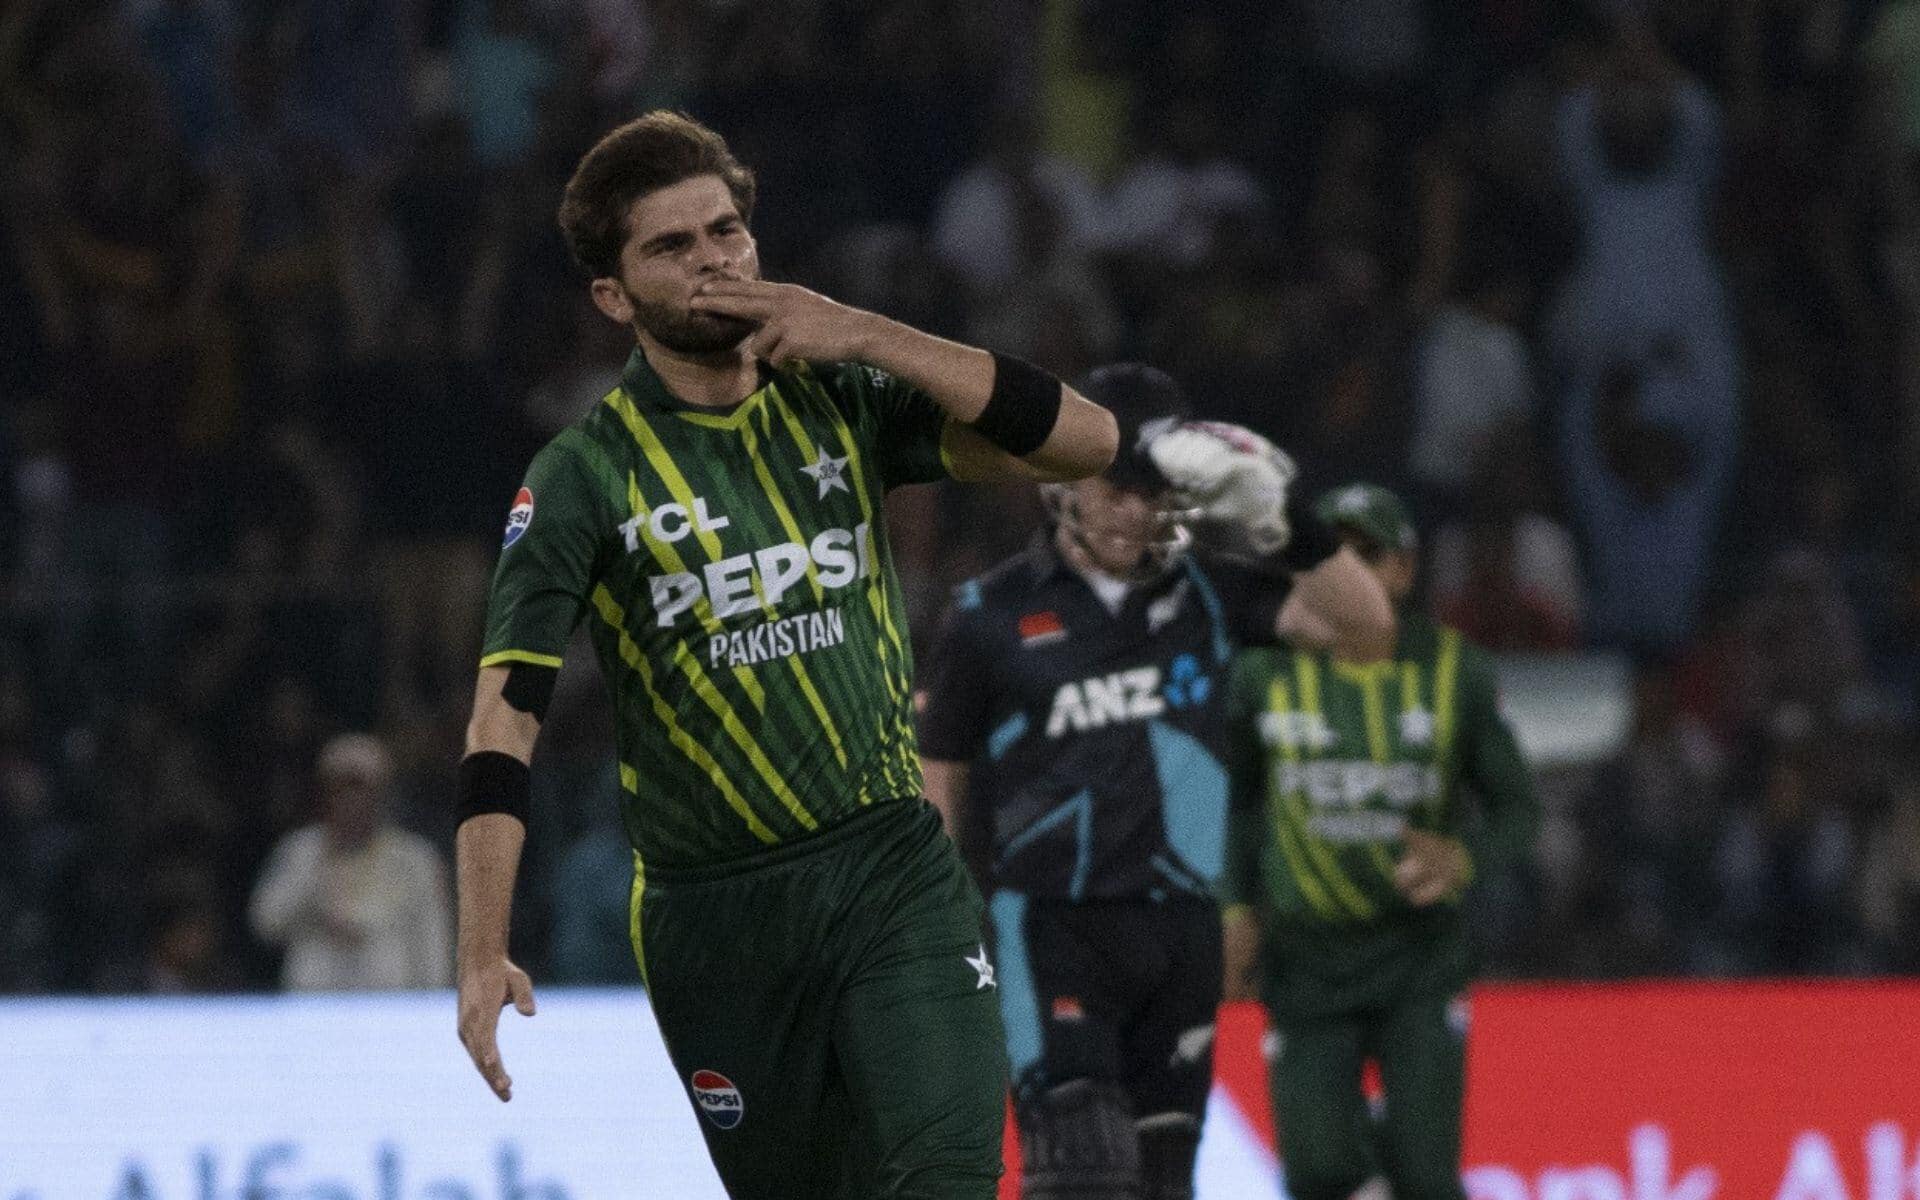 Shaheen Afridi celebrating a wicket with PAK teammates in 5th T20I (PCB)